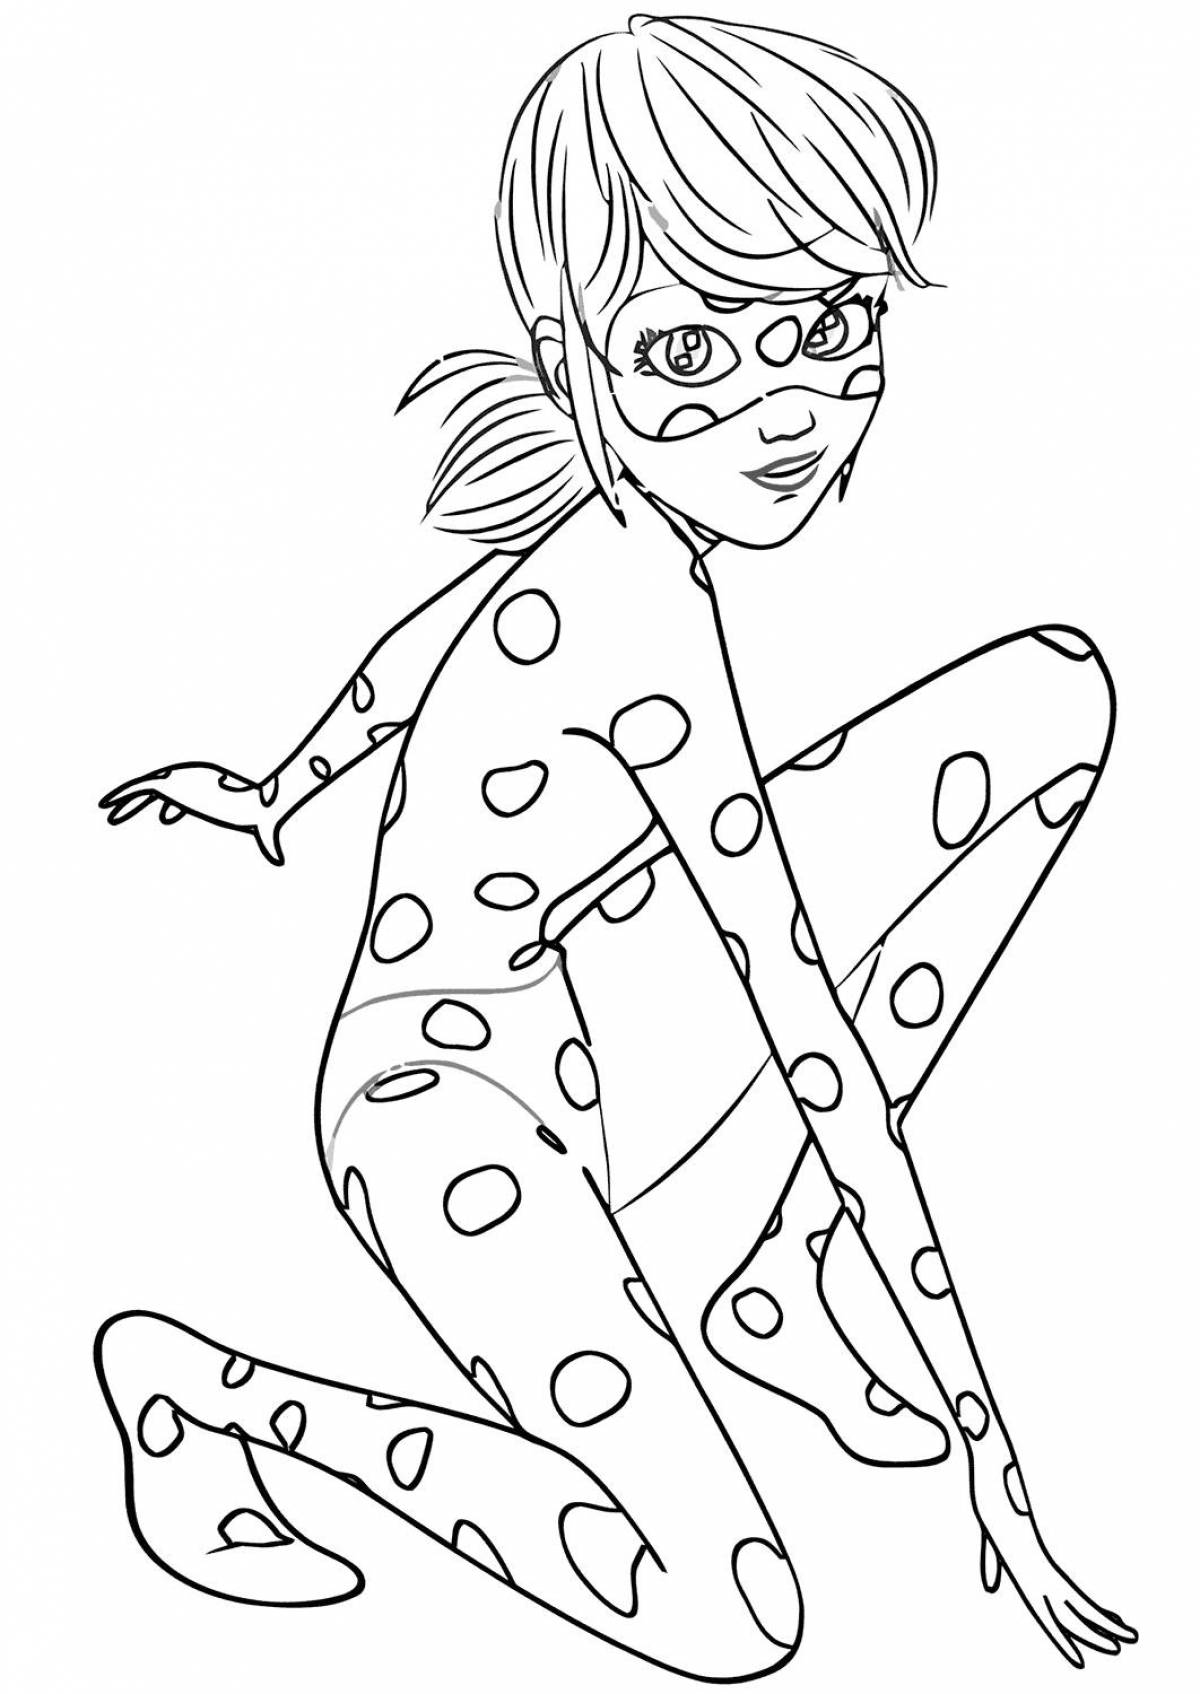 Miraculous ladybug and super cat coloring pages for kids